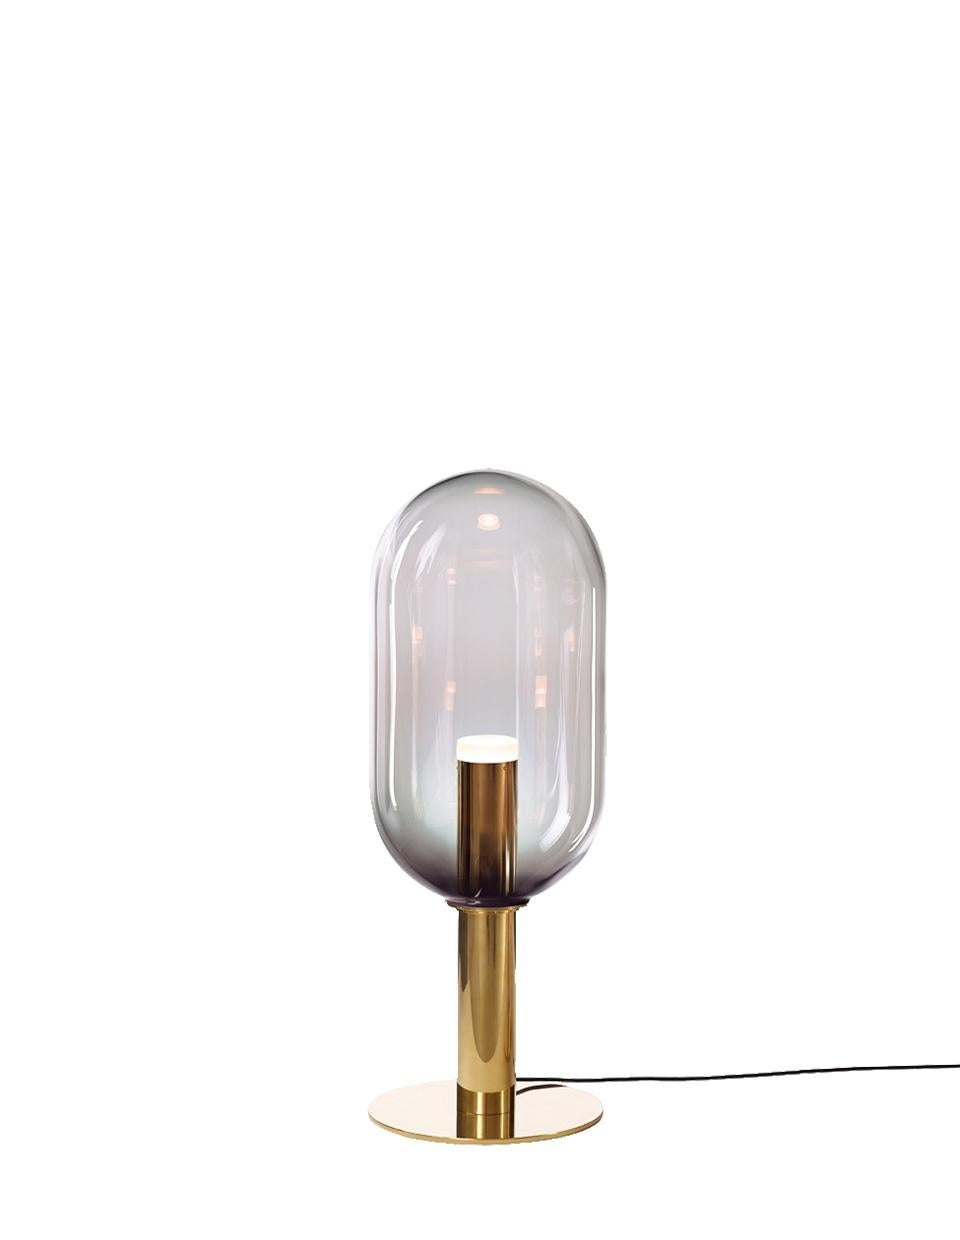 Smoke Grey / Gold Blown Crystal Glass Floor Lamp, Phenomena by Dechem Studio for Bomma

The name chosen for this BOMMA collection, inspired by basic geometric shapes, comes from the Greek word for ‘appearances.’ According to Plato’s teachings,